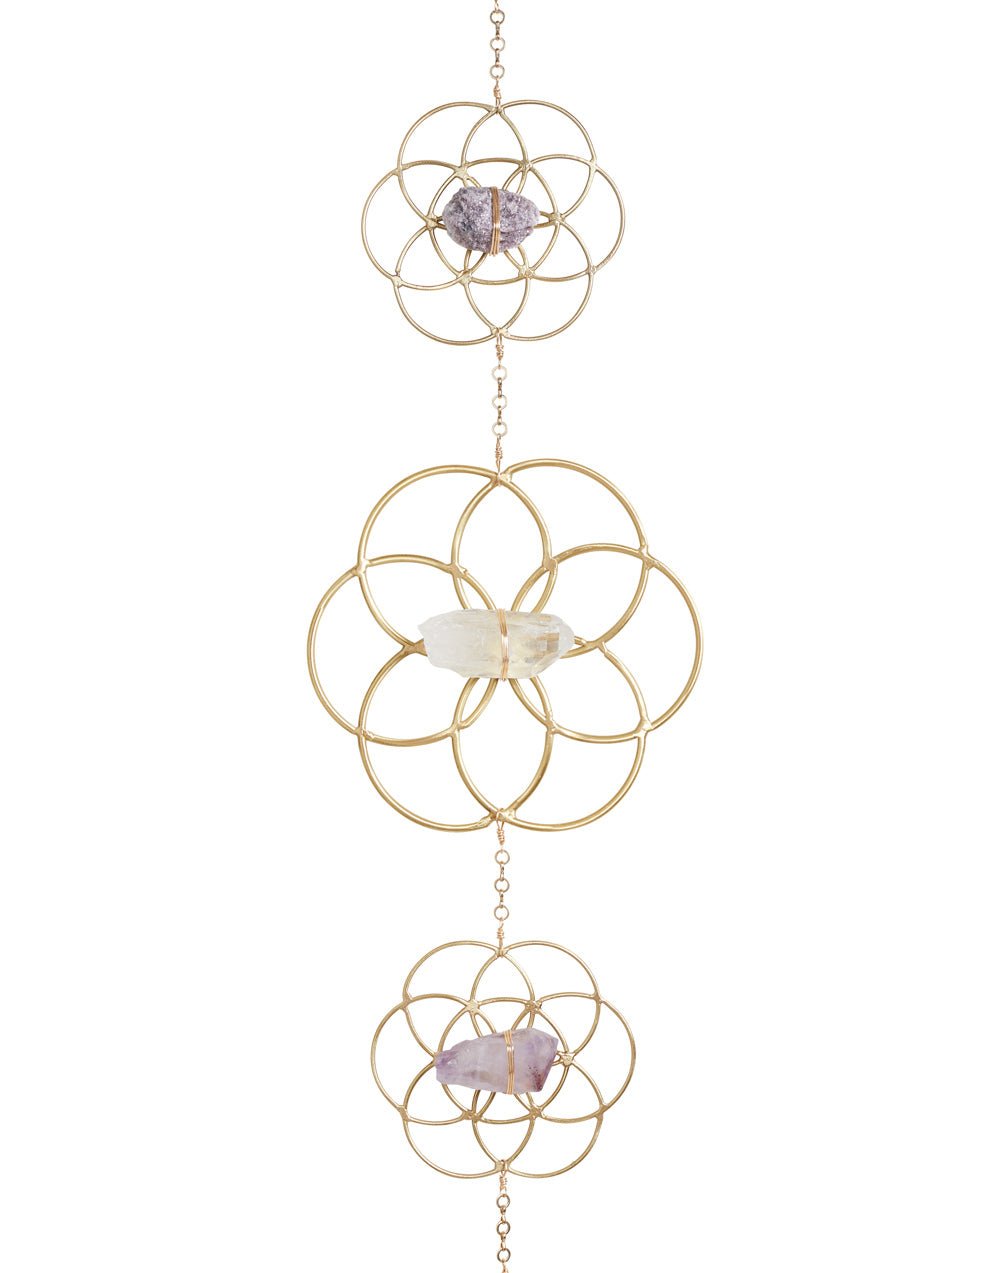 Crystal Grid Flower of Life Wall Hanging by Ariana Ost